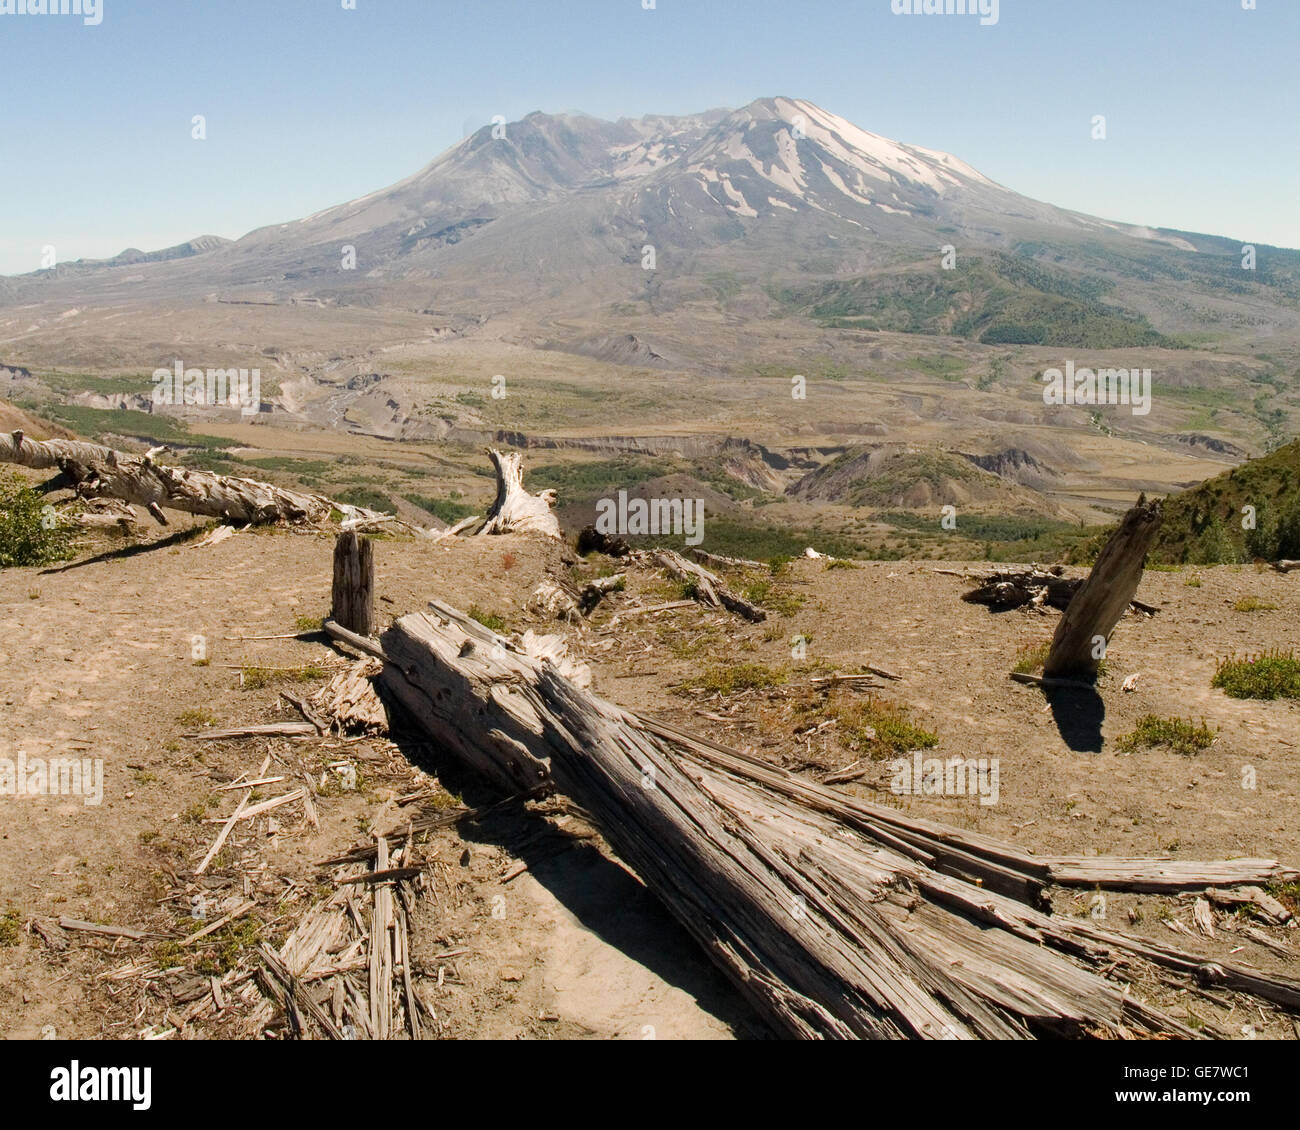 Mount St. Helens is an active volcano in Washington State in the United States' Pacific Northwest. Stock Photo